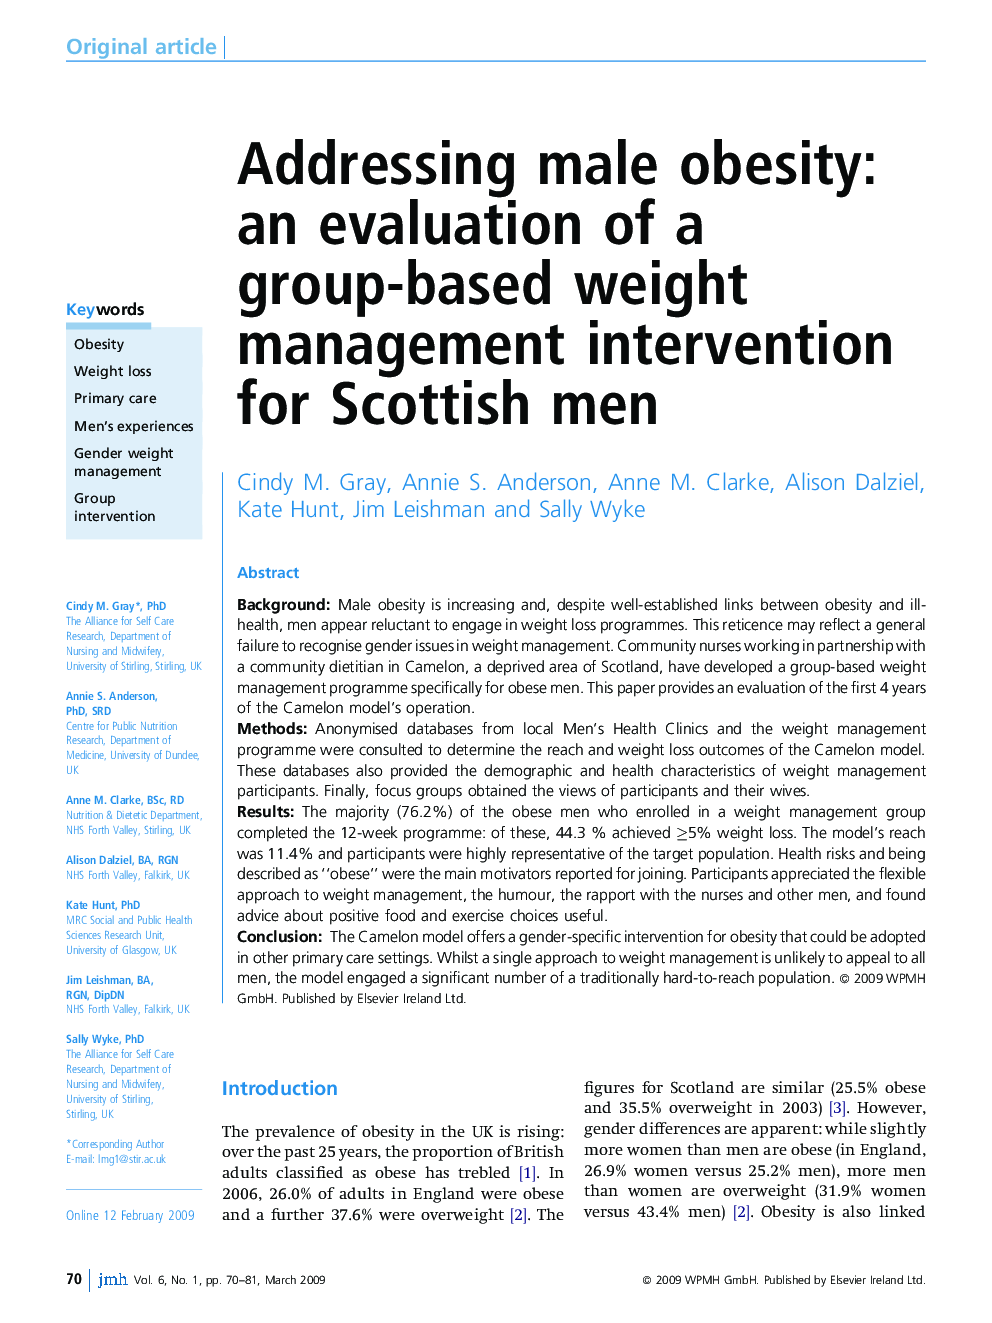 Addressing male obesity: an evaluation of a group-based weight management intervention for Scottish men